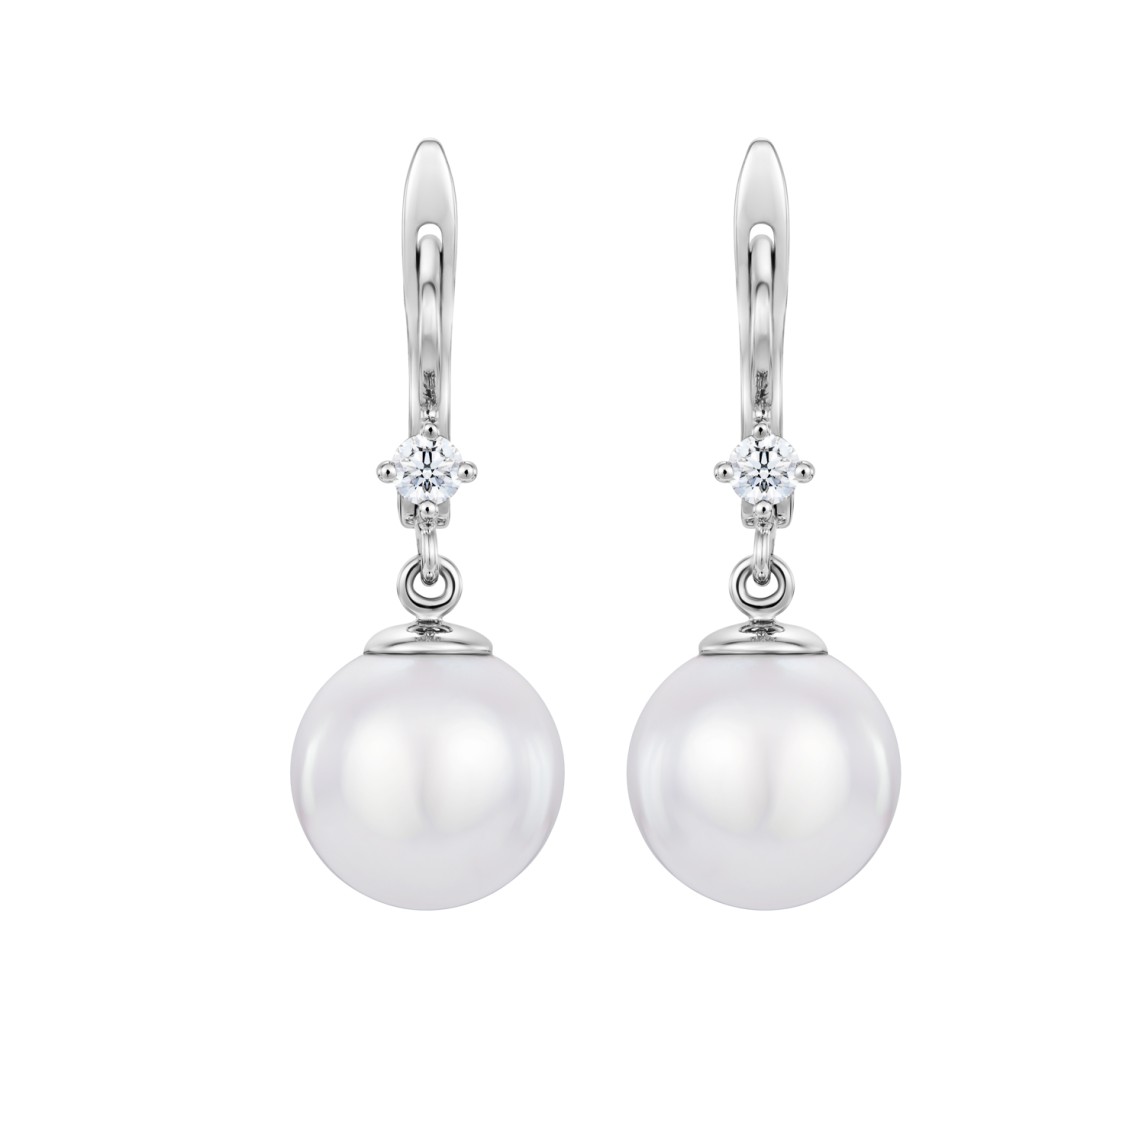 White Gold Earrings With Diamonds And Pearls